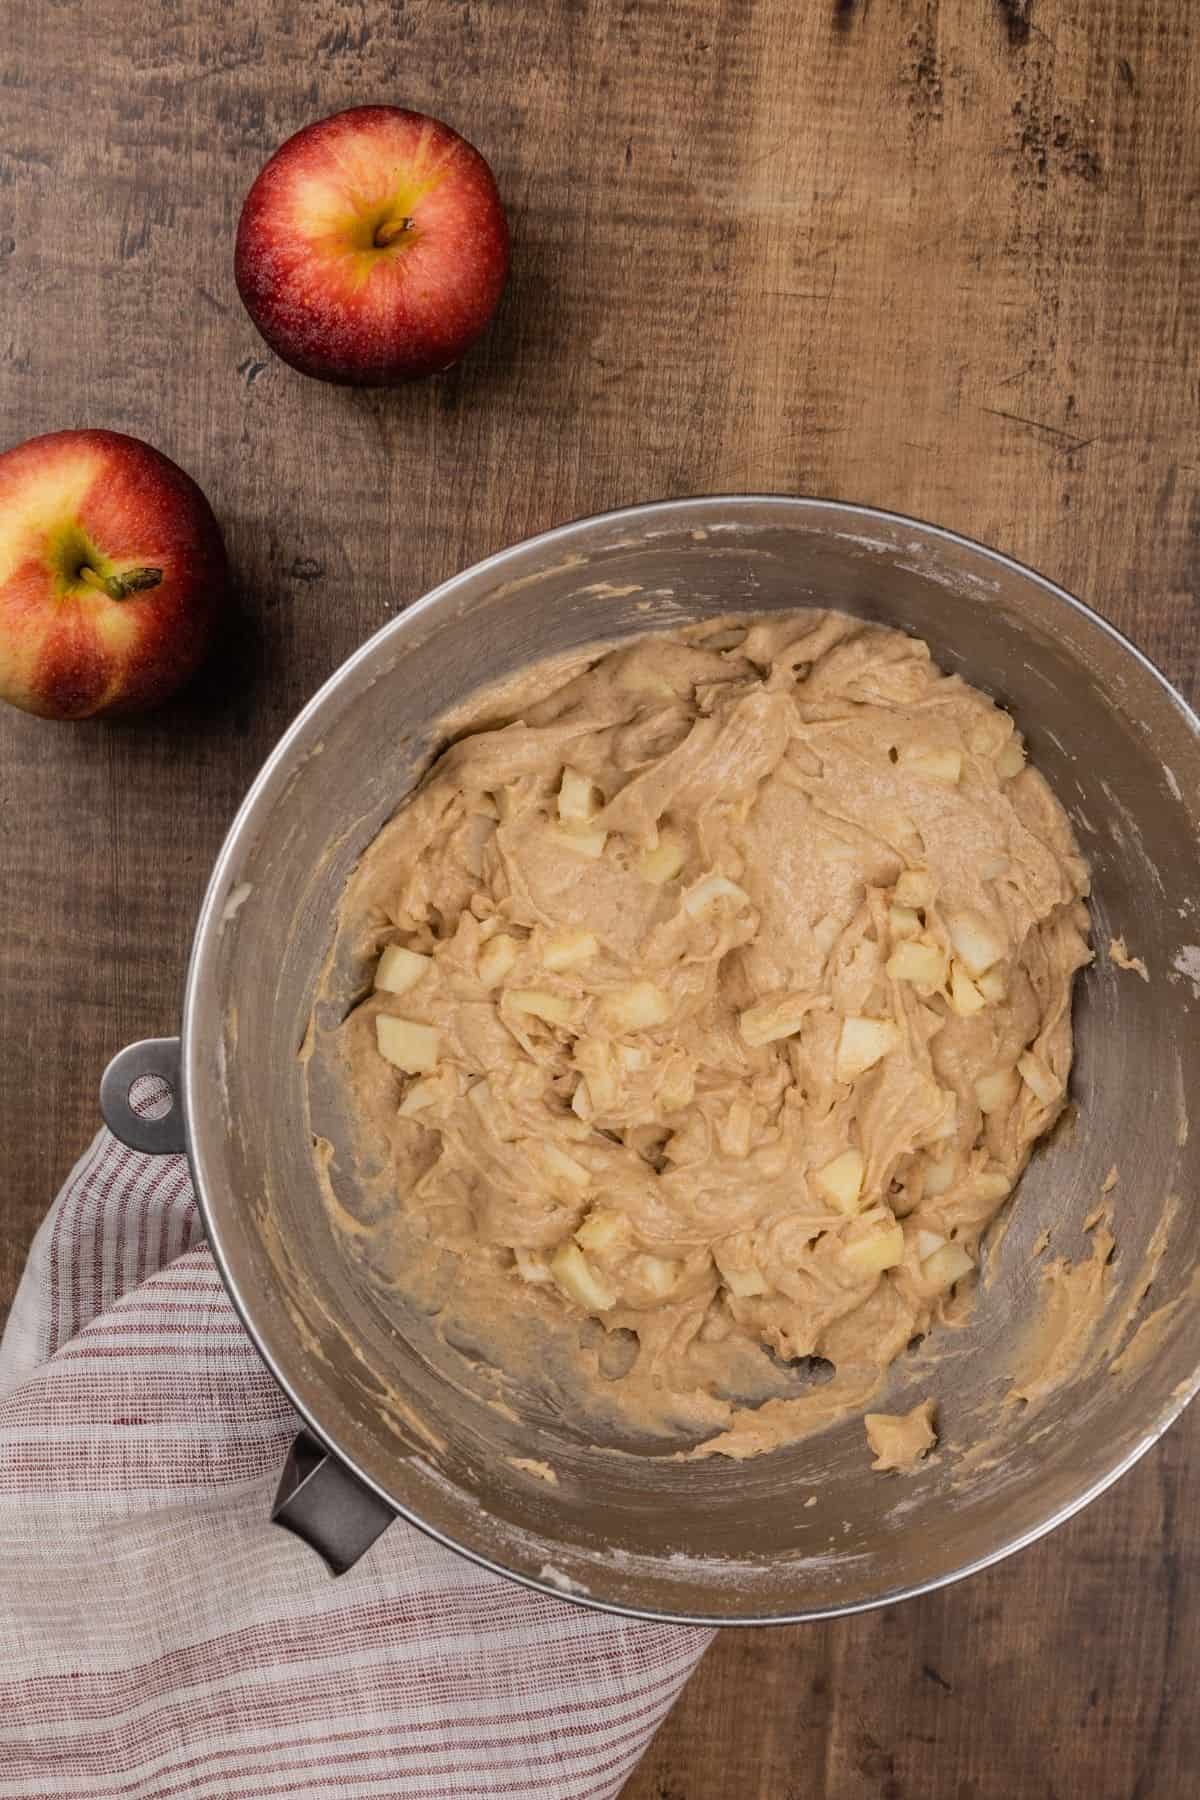 a silver bowl filled with the finished apple cinnamon muffin batter and you can see the apple chunks inside the batter. a red and white stripe towel is under the bowl. two apples are next to the bowl.